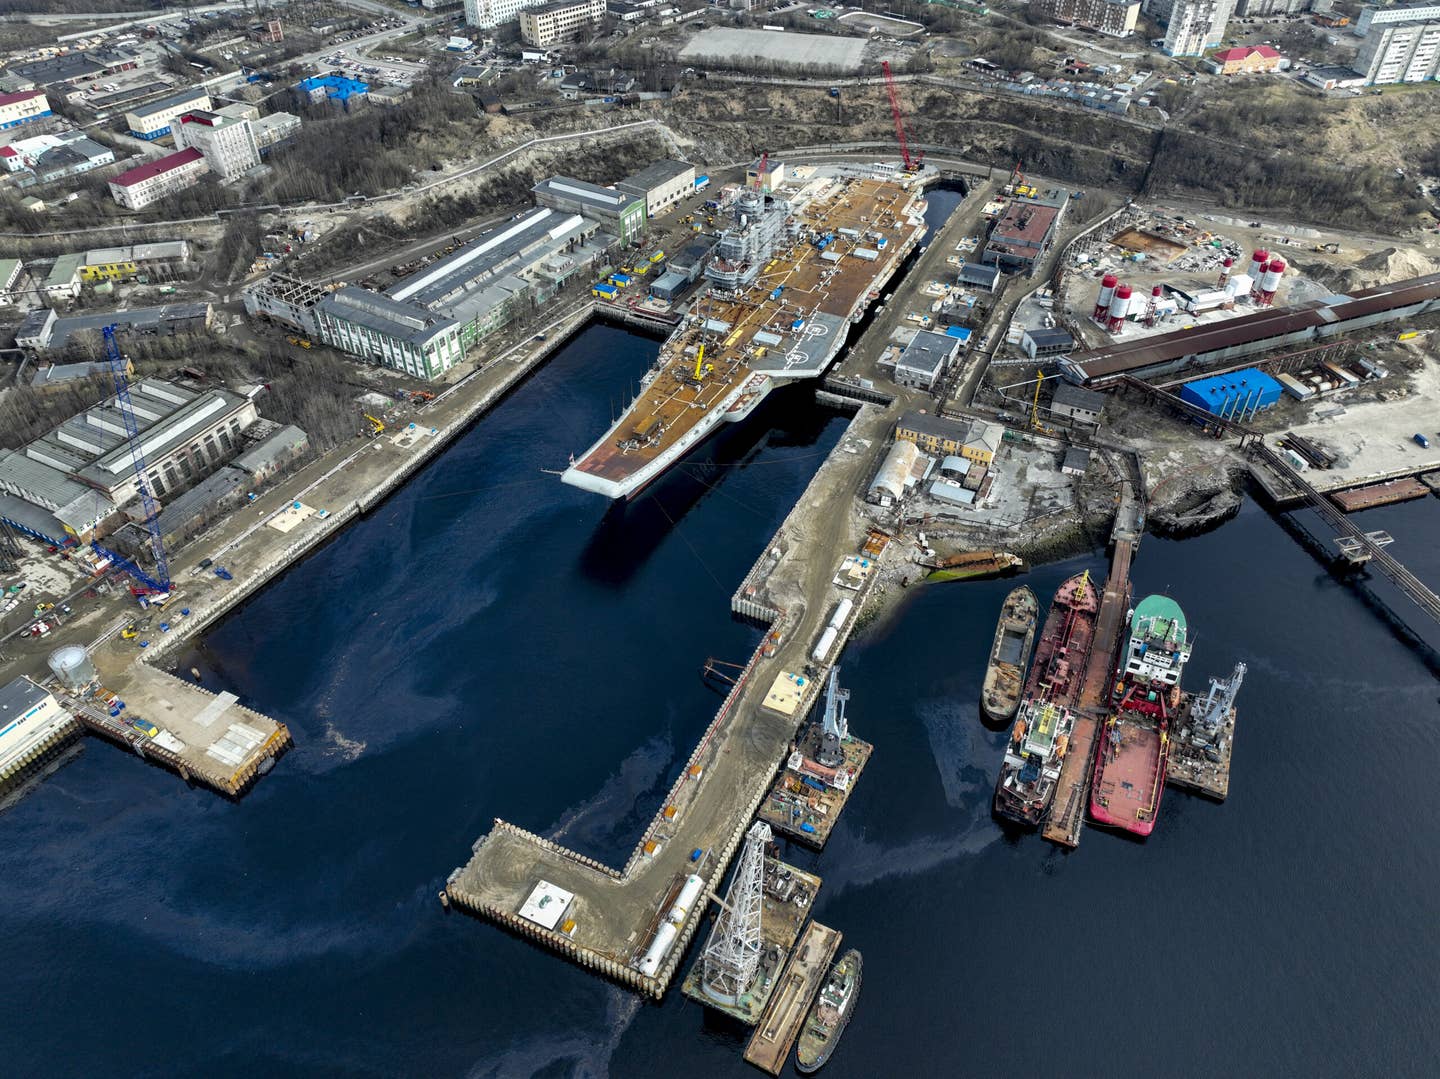 Russia's lone aircraft carrier is towed to the 35th squadron shipyard for maintenance and repair works in Murmansk, Russia on May 20, 2022. <em>Credit: Photo by Semen Vasileyev/Anadolu Agency via Getty Images</em>